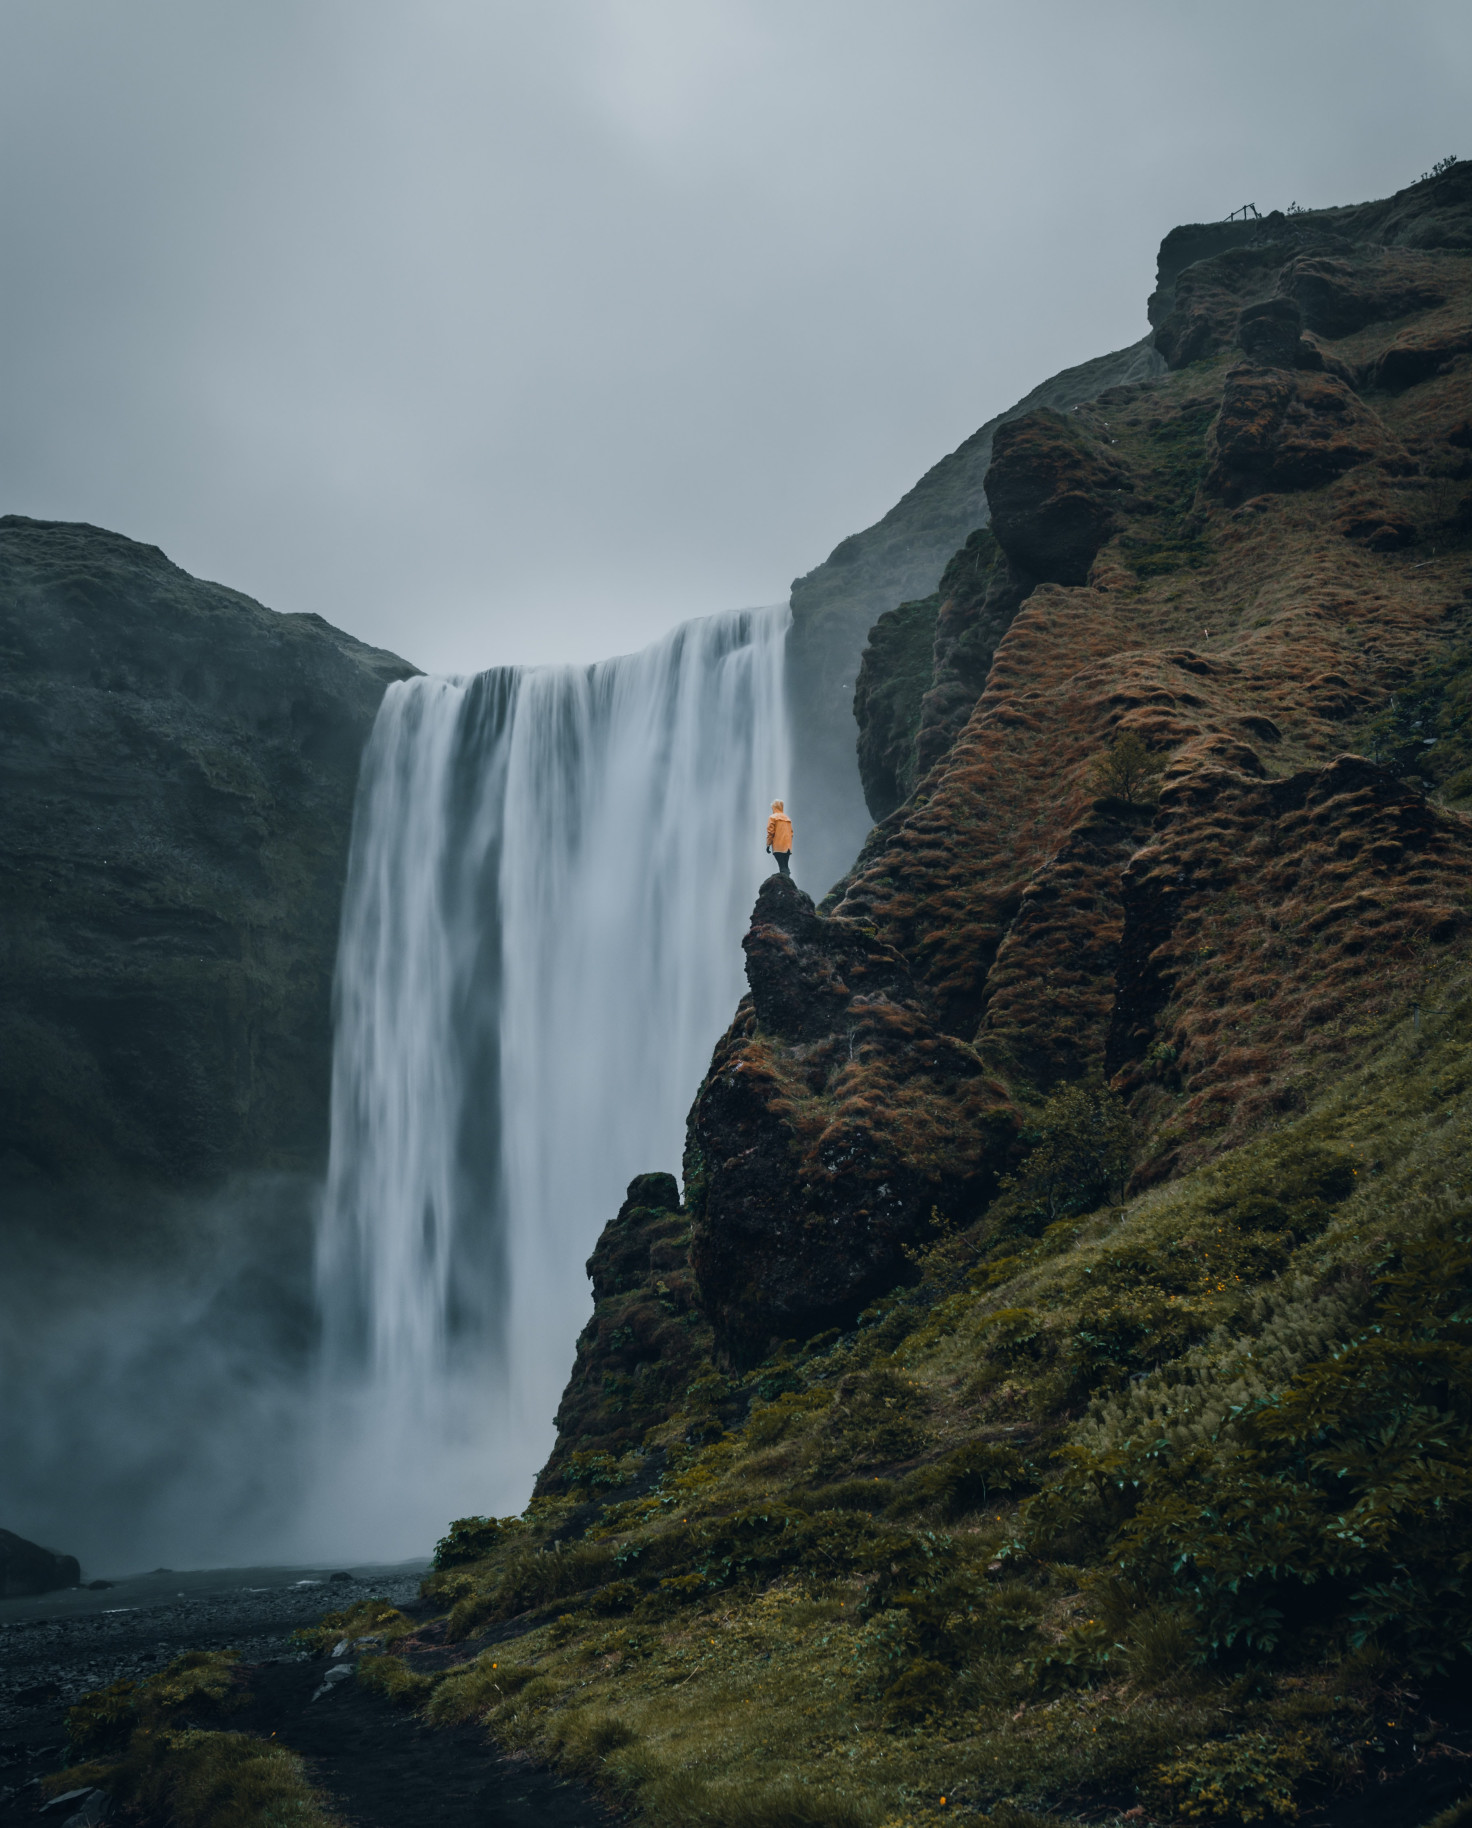 Person wearing orange jacket standing in front of waterfall on a cloudy day